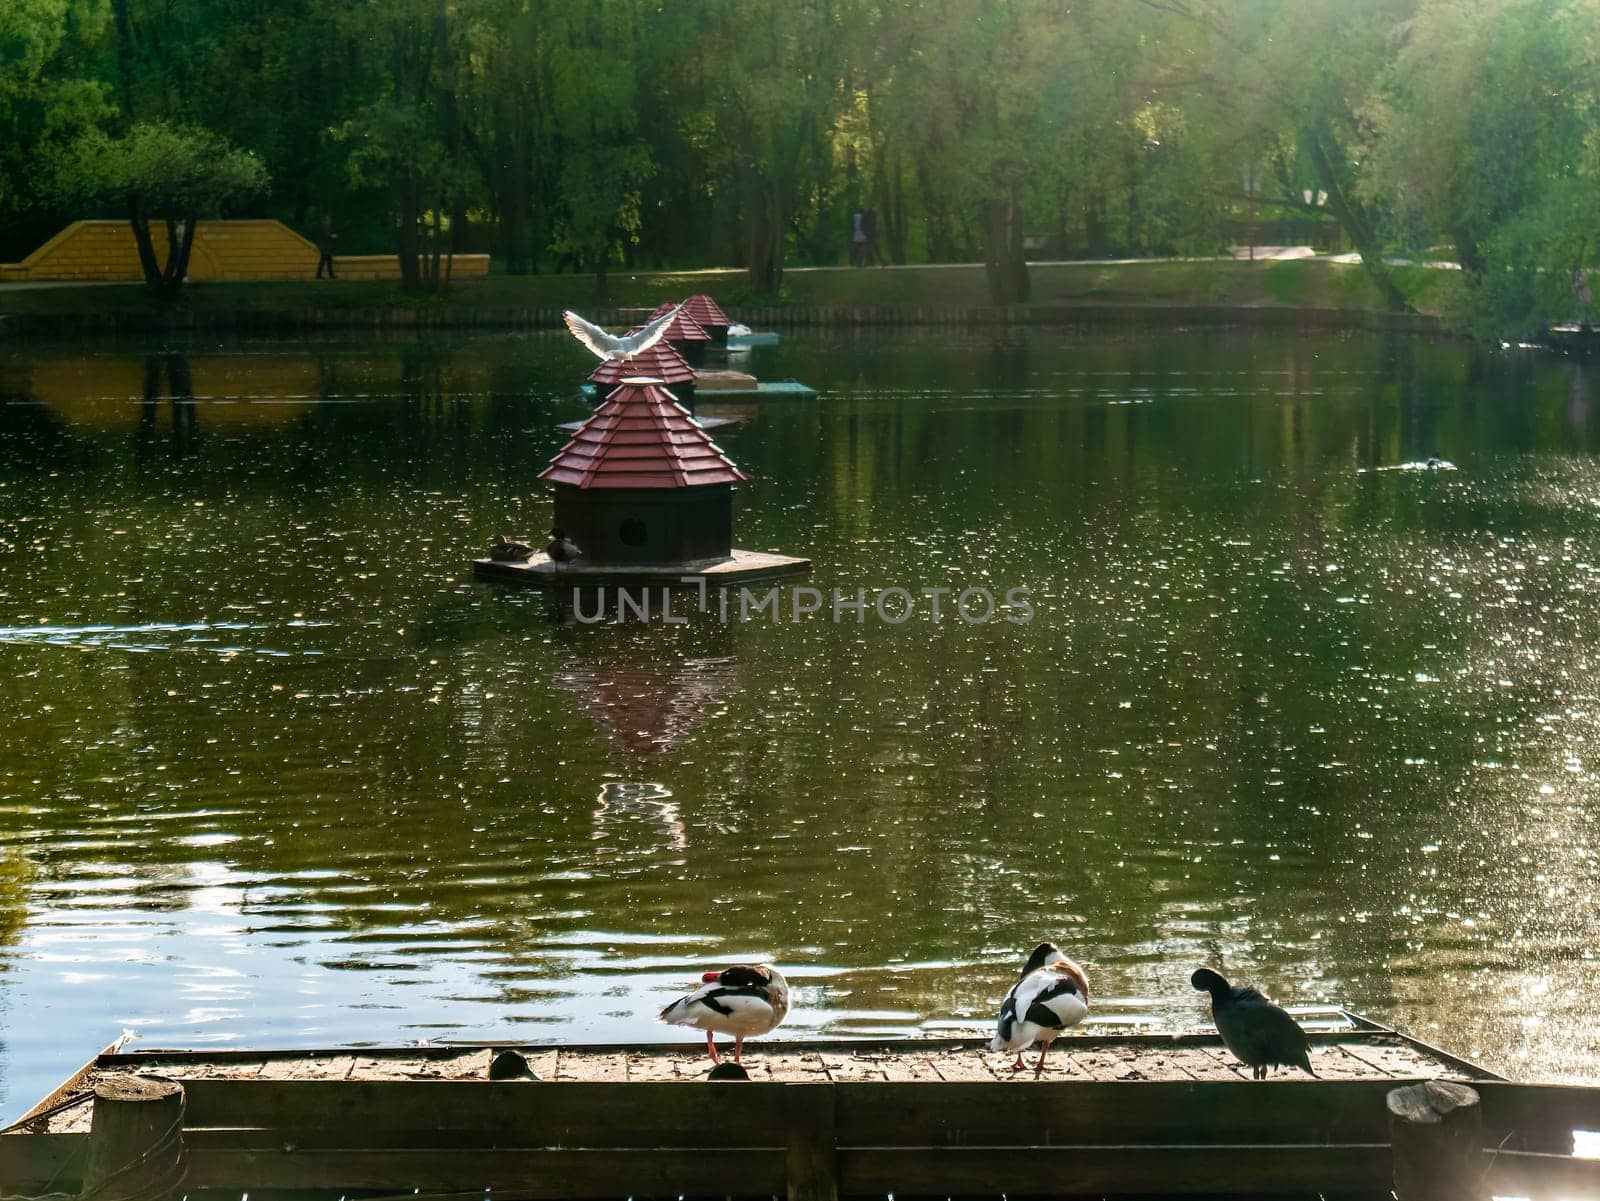 Ducks are sitting by the pond admiring the surroundings and enjoying the warm weather on a sunny summer day by lempro